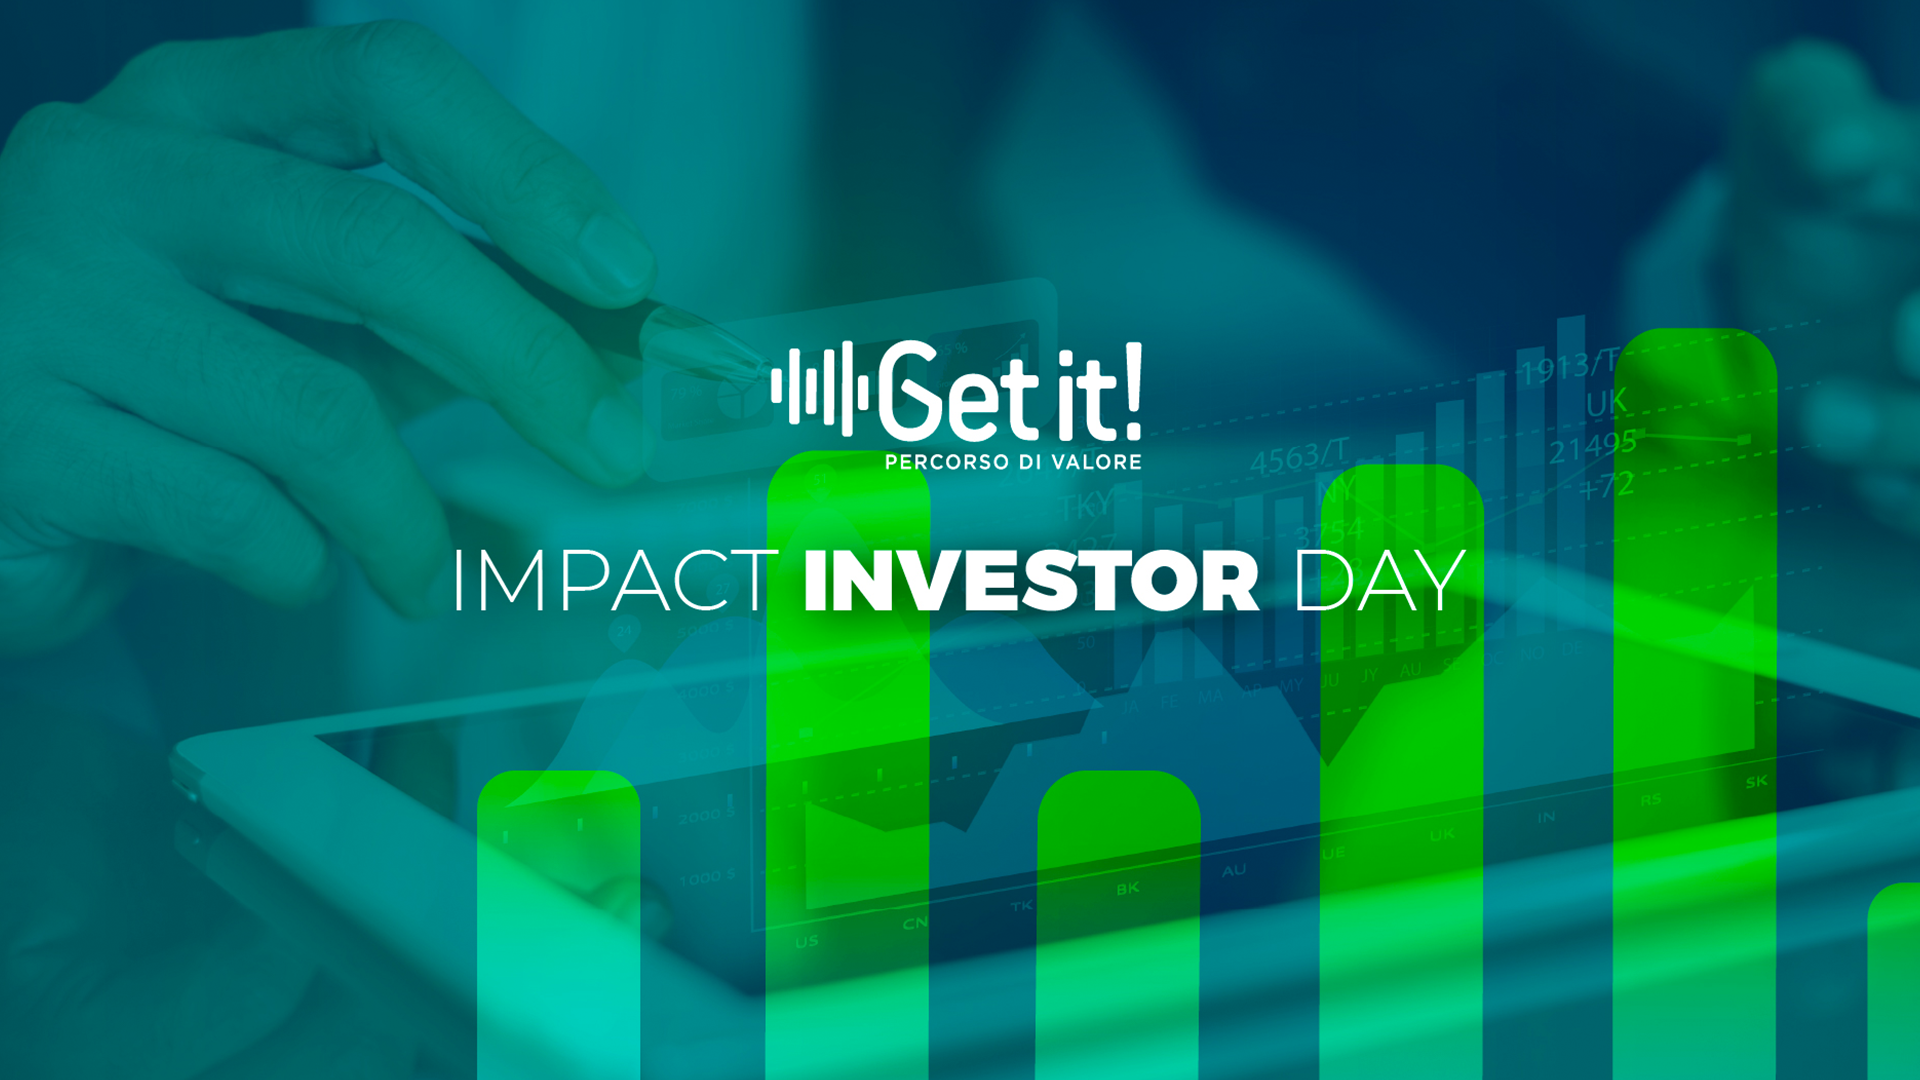 GET IT! Giovedì 03 dicembre il 2° IMPACT INVESTOR DAY Get it!